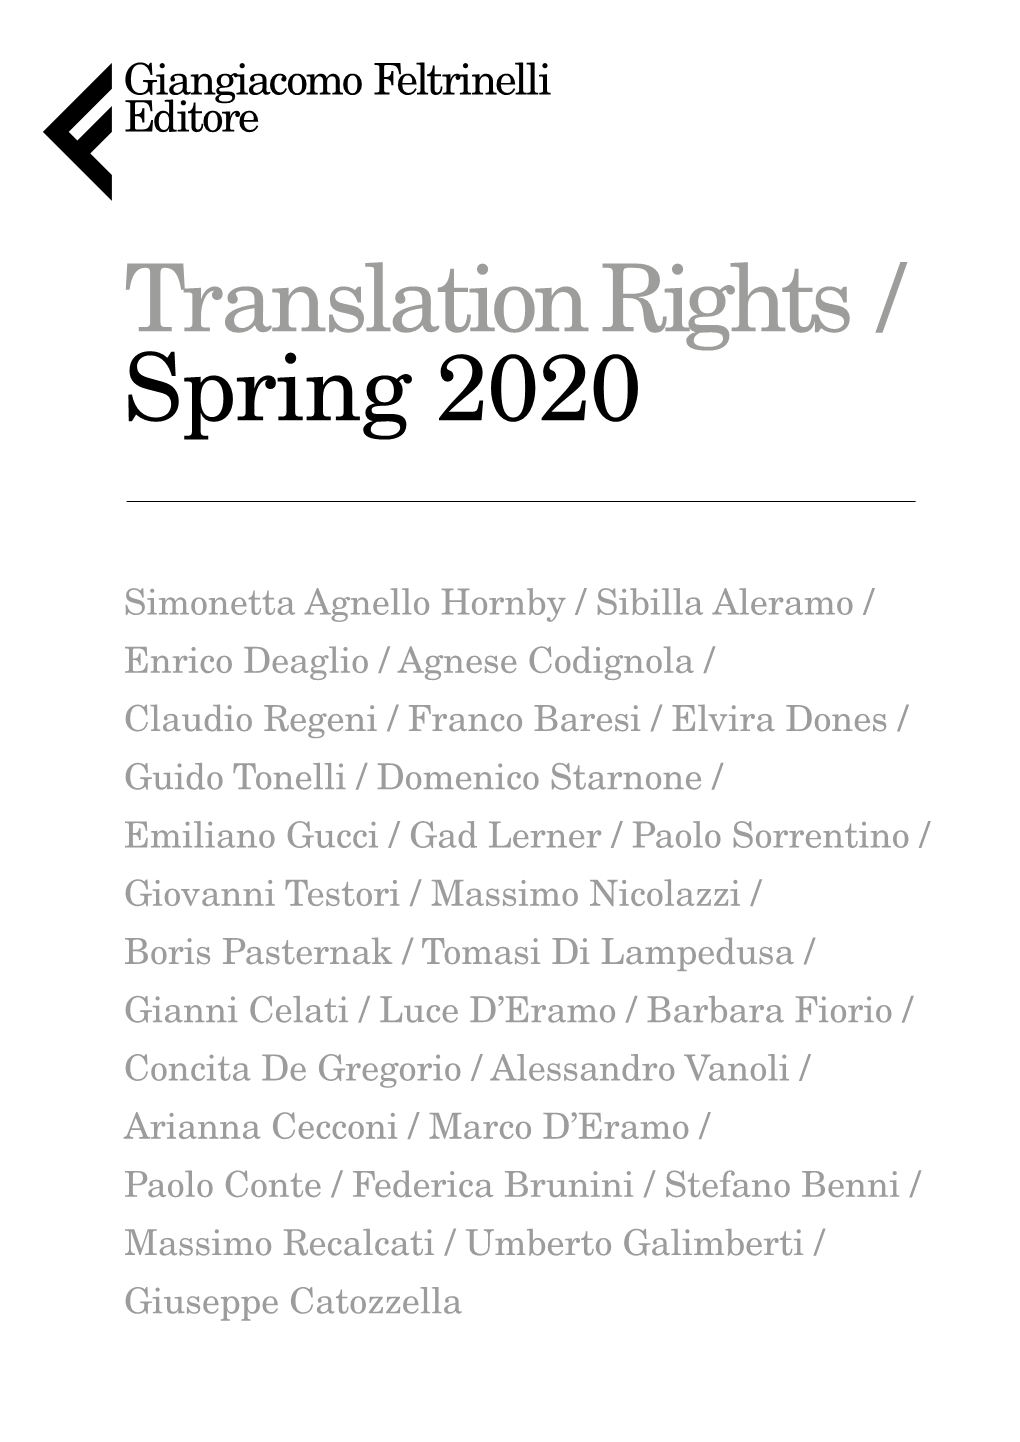 Spring 2020 Rights Guide